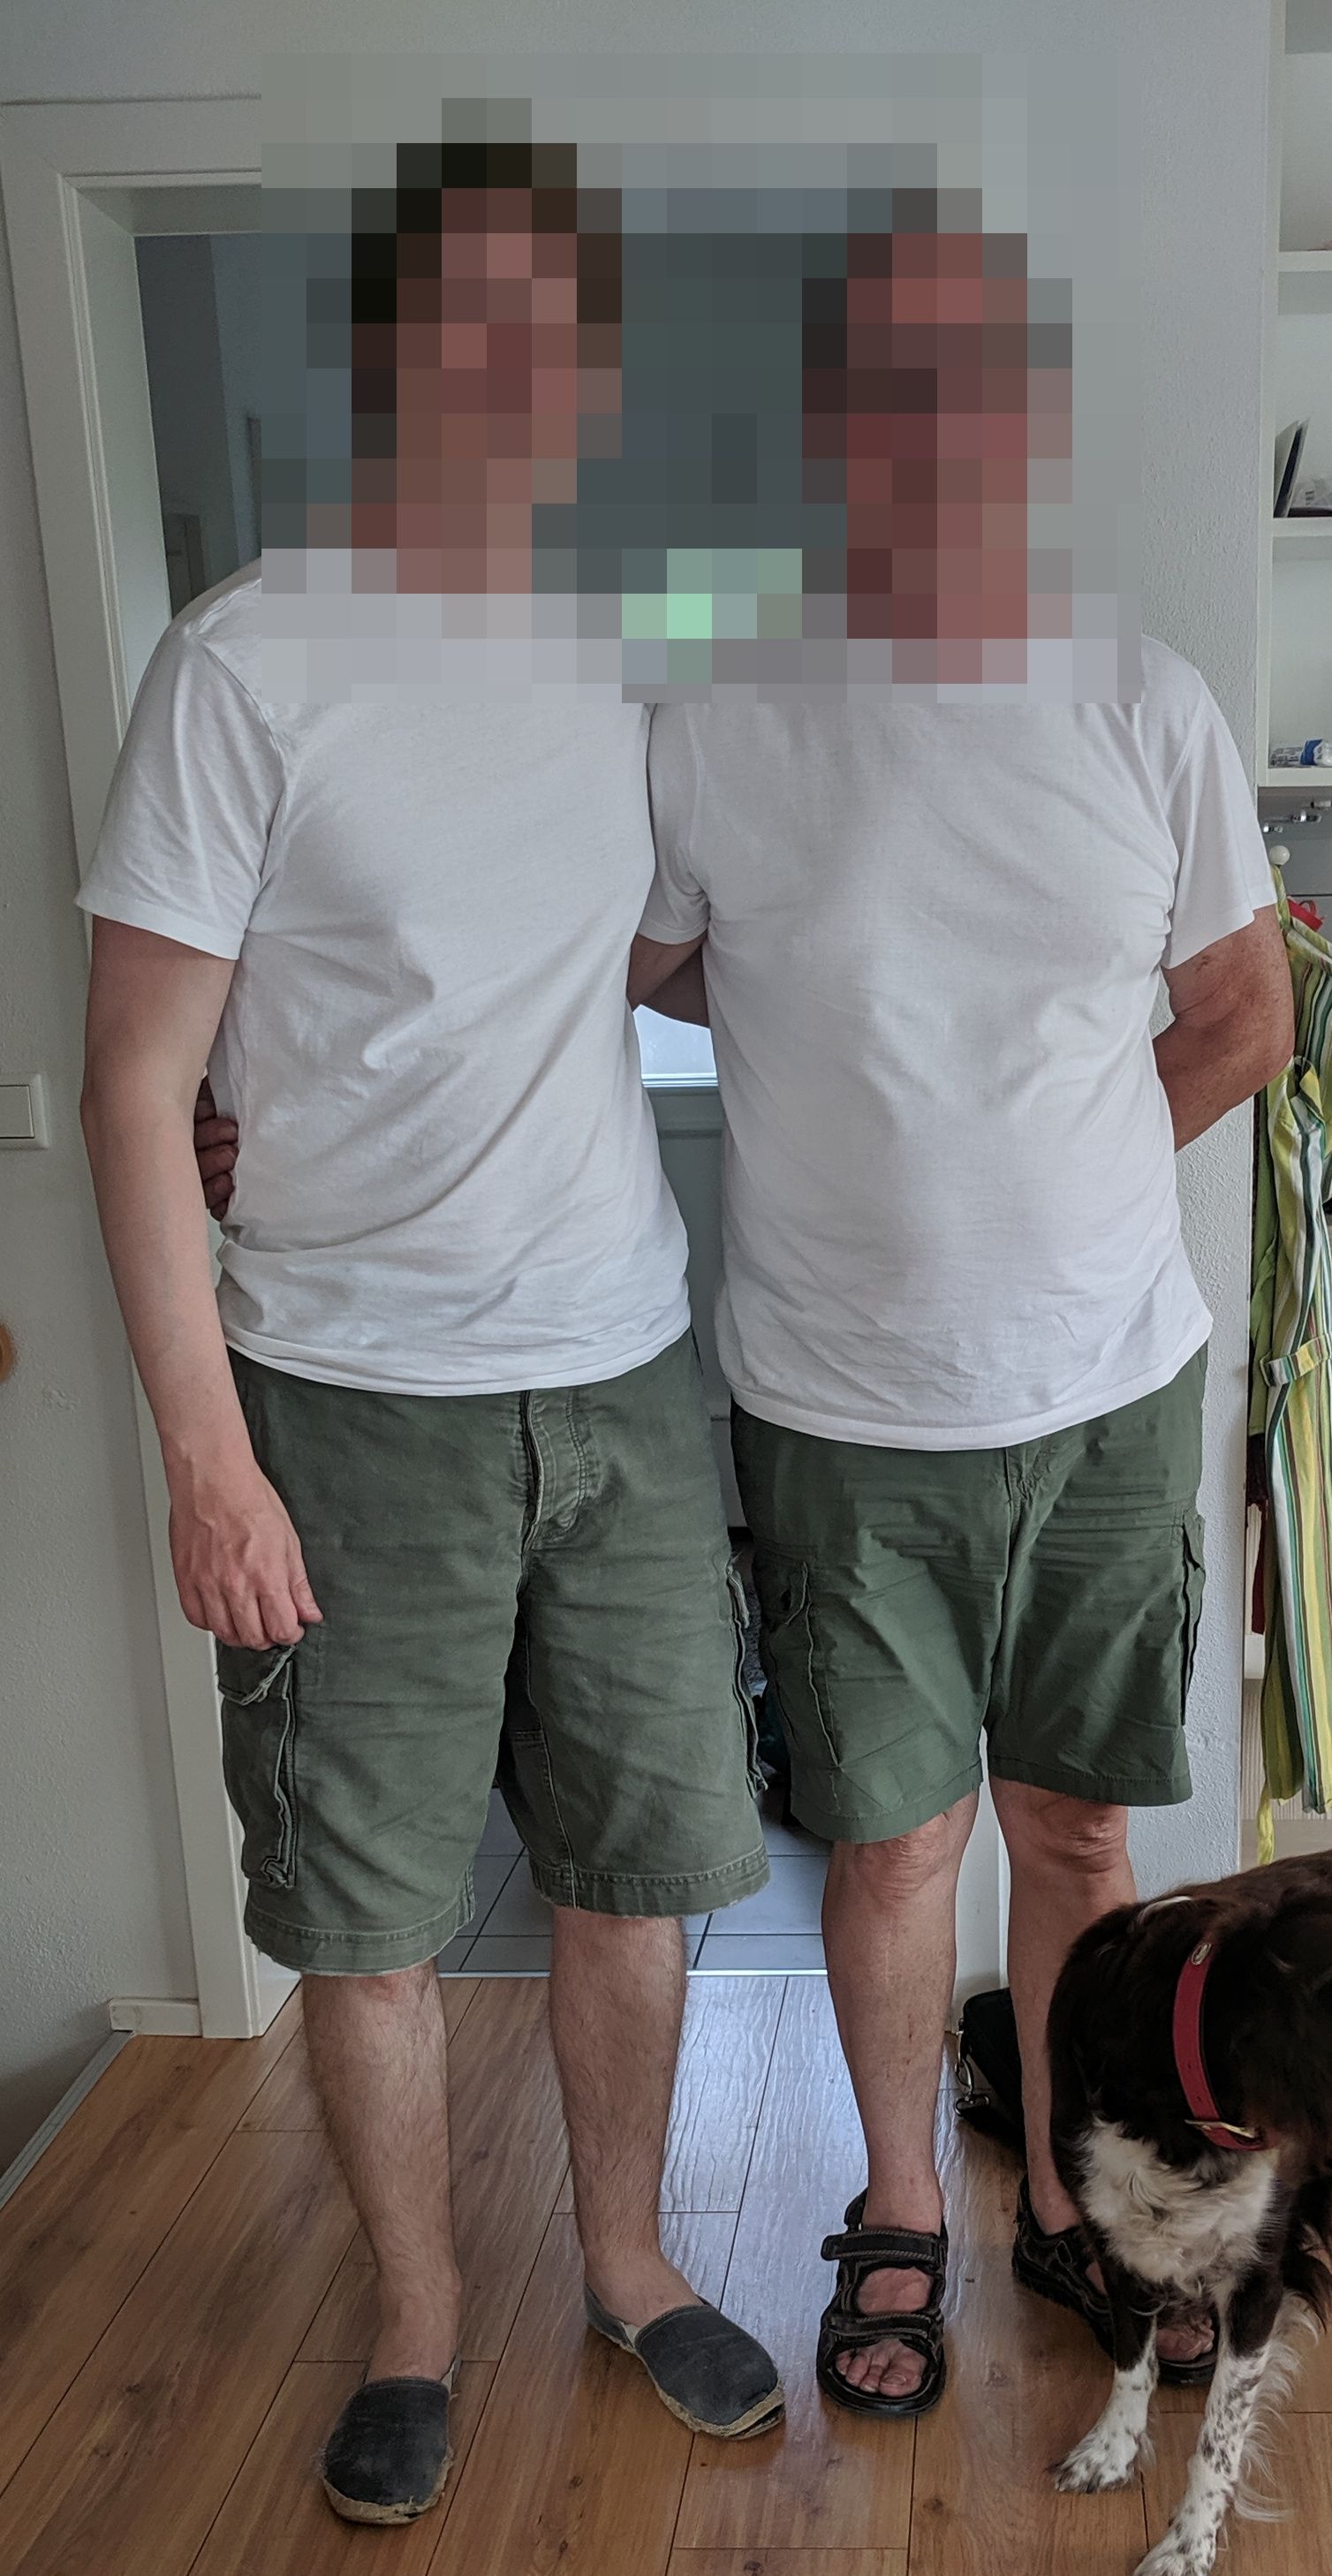 Since we're talking cargo shorts, here's a picture of my dad and me . We did not plan this.